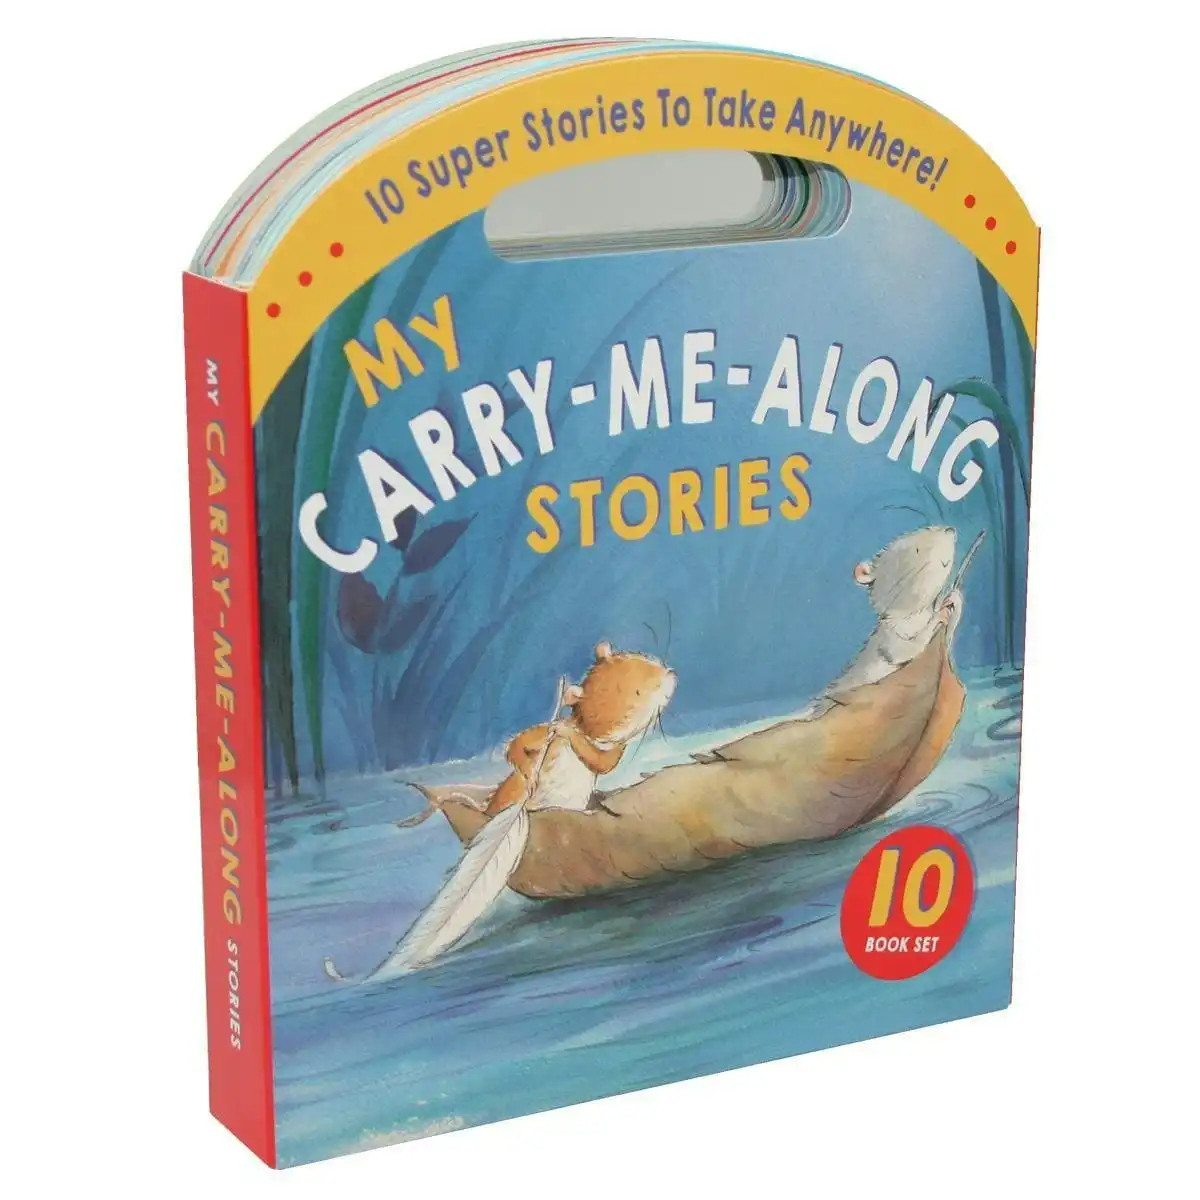 Promotional My Carry-me-along Stories